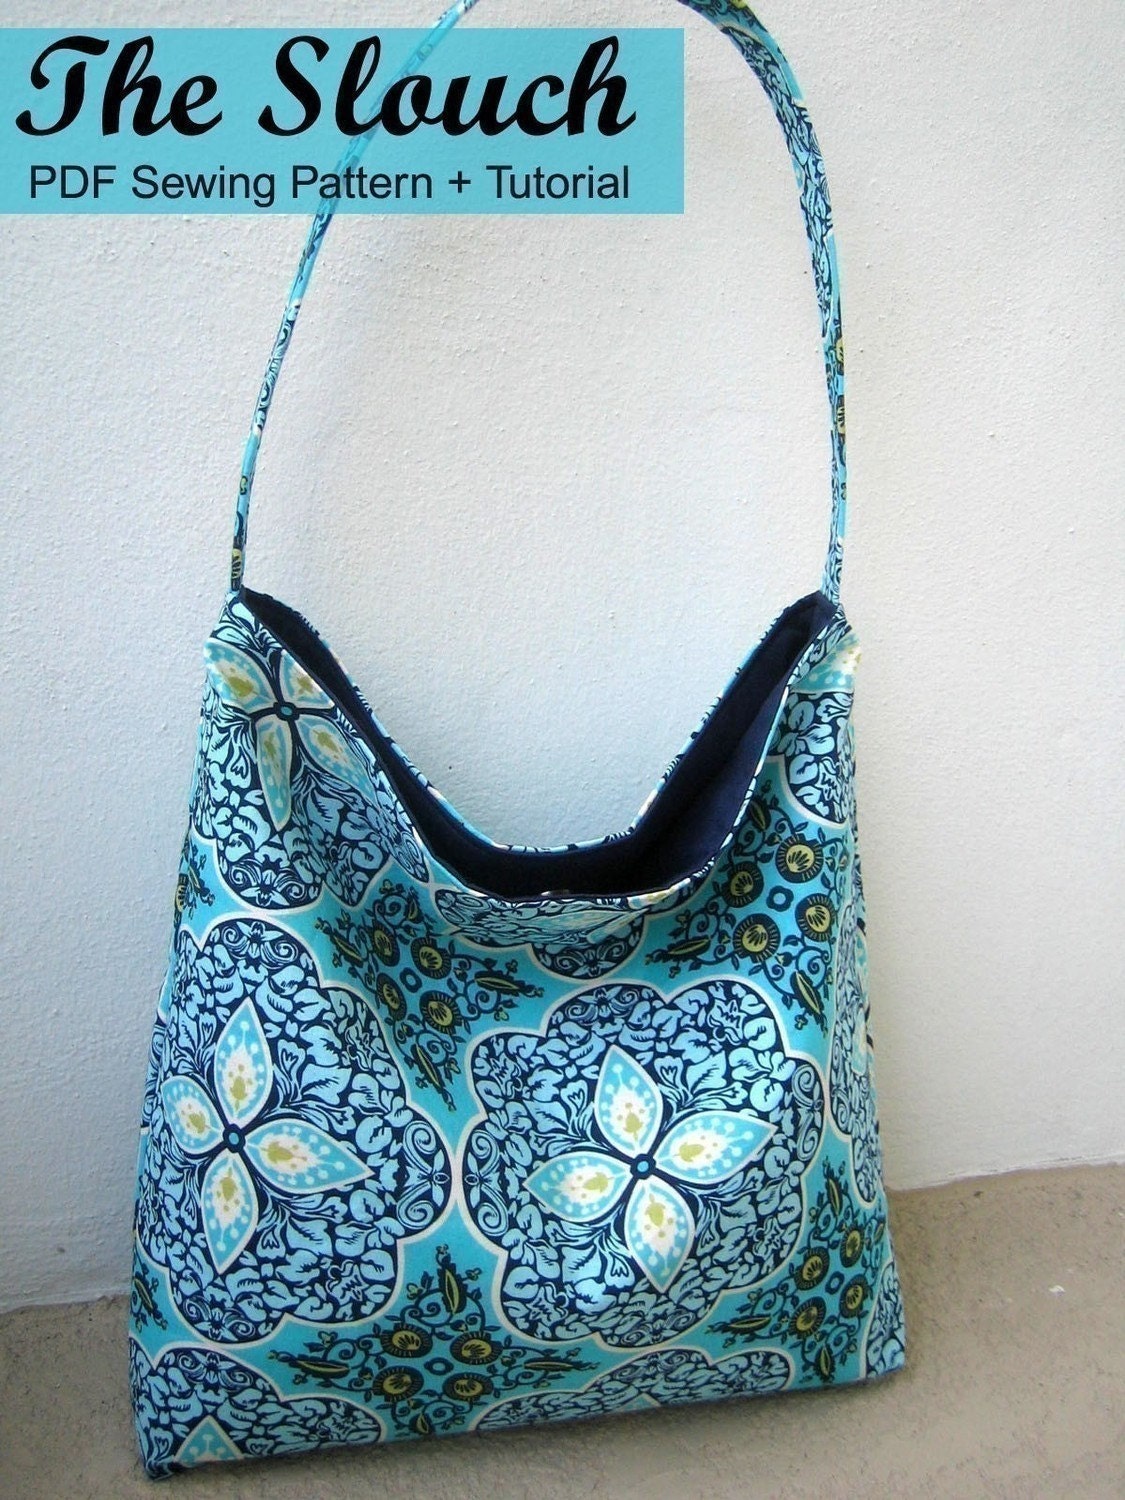 The Slouch Hobo Style Bag PDF Sewing Pattern and Tutorial